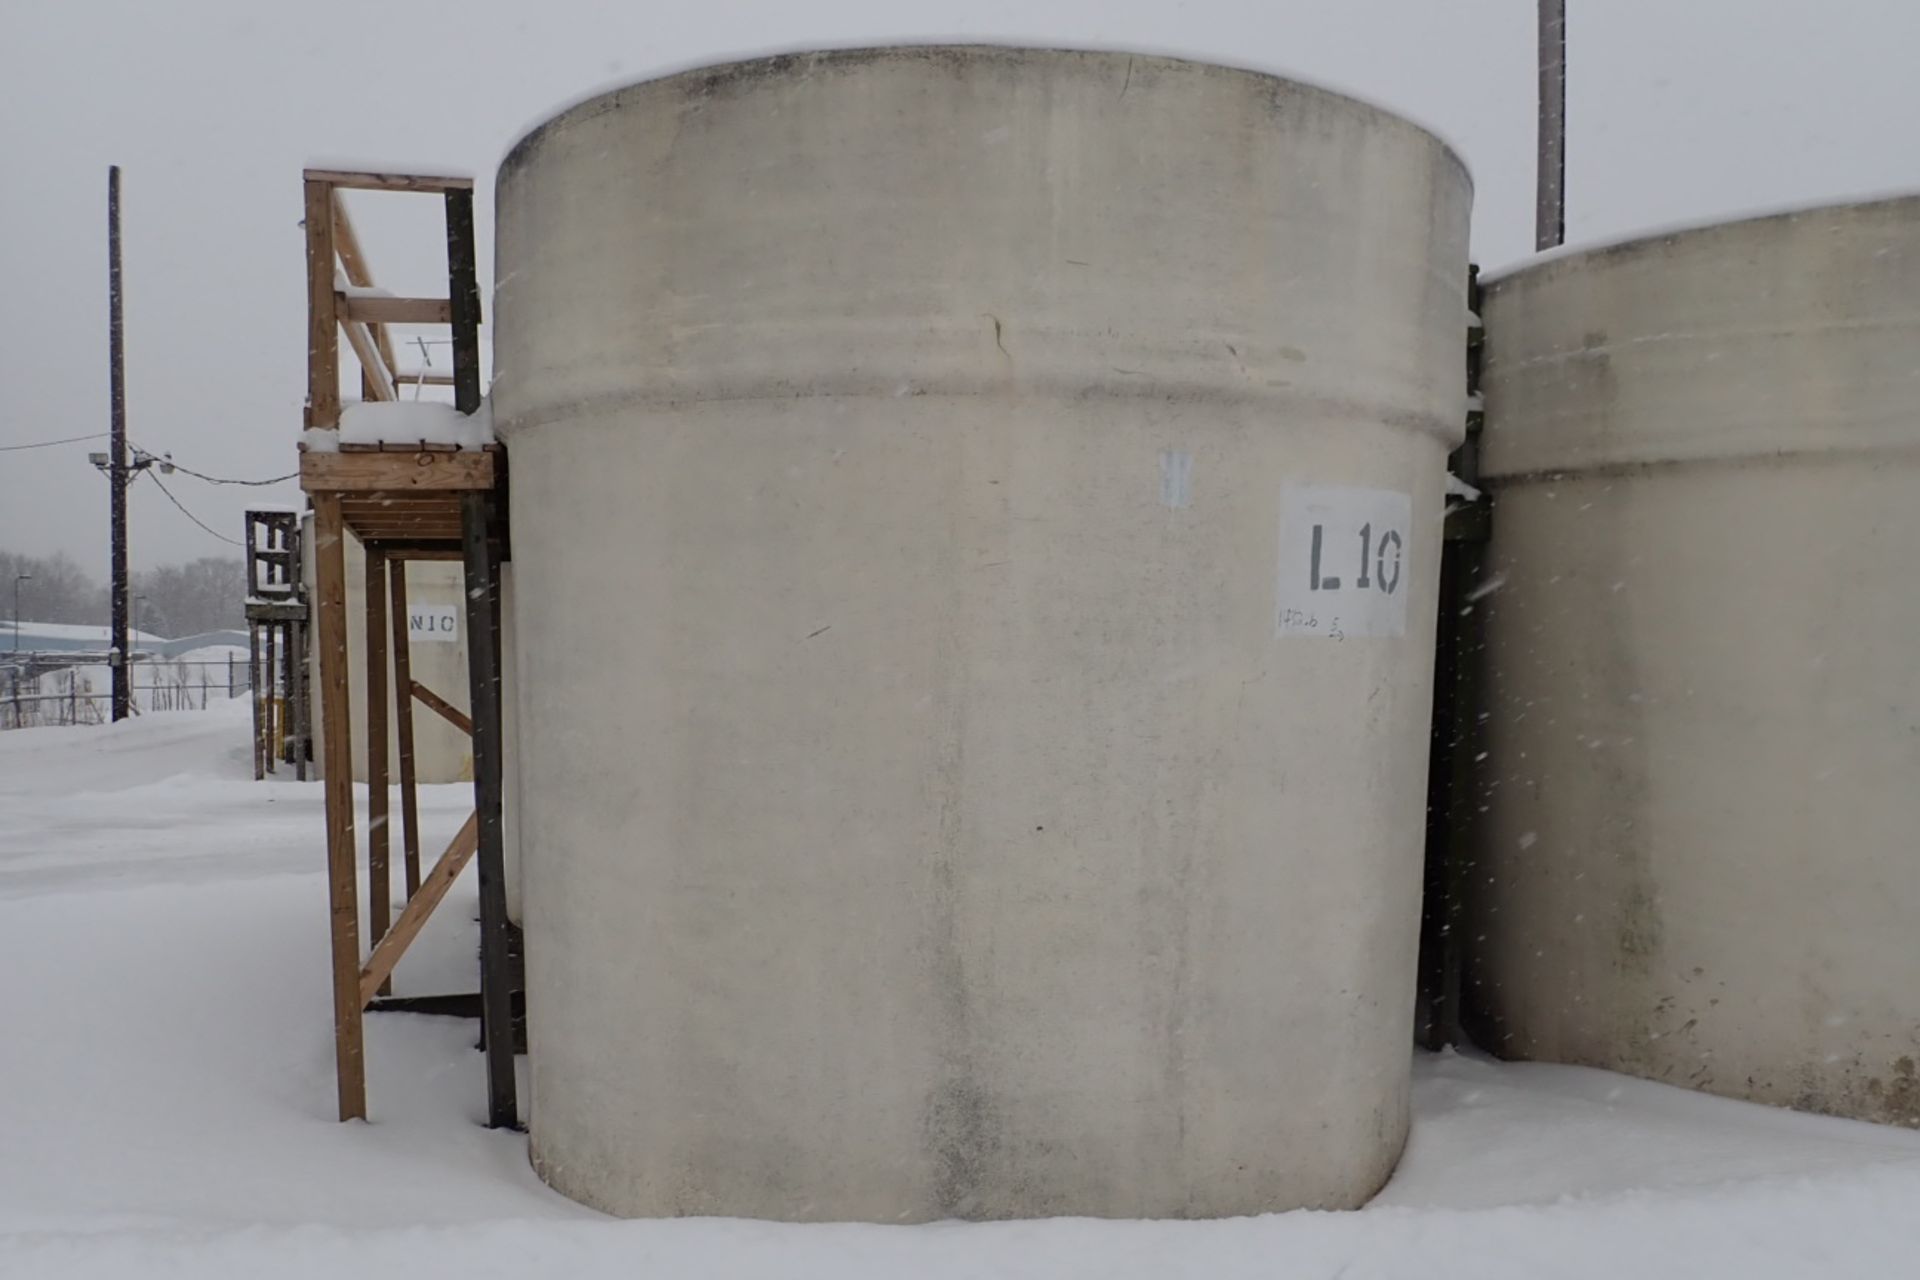 Fiberglass open top tank, 144 in. dia x 144 in. tall, 36 in. ring at the top. (Tanks L6-L10) - Image 4 of 5